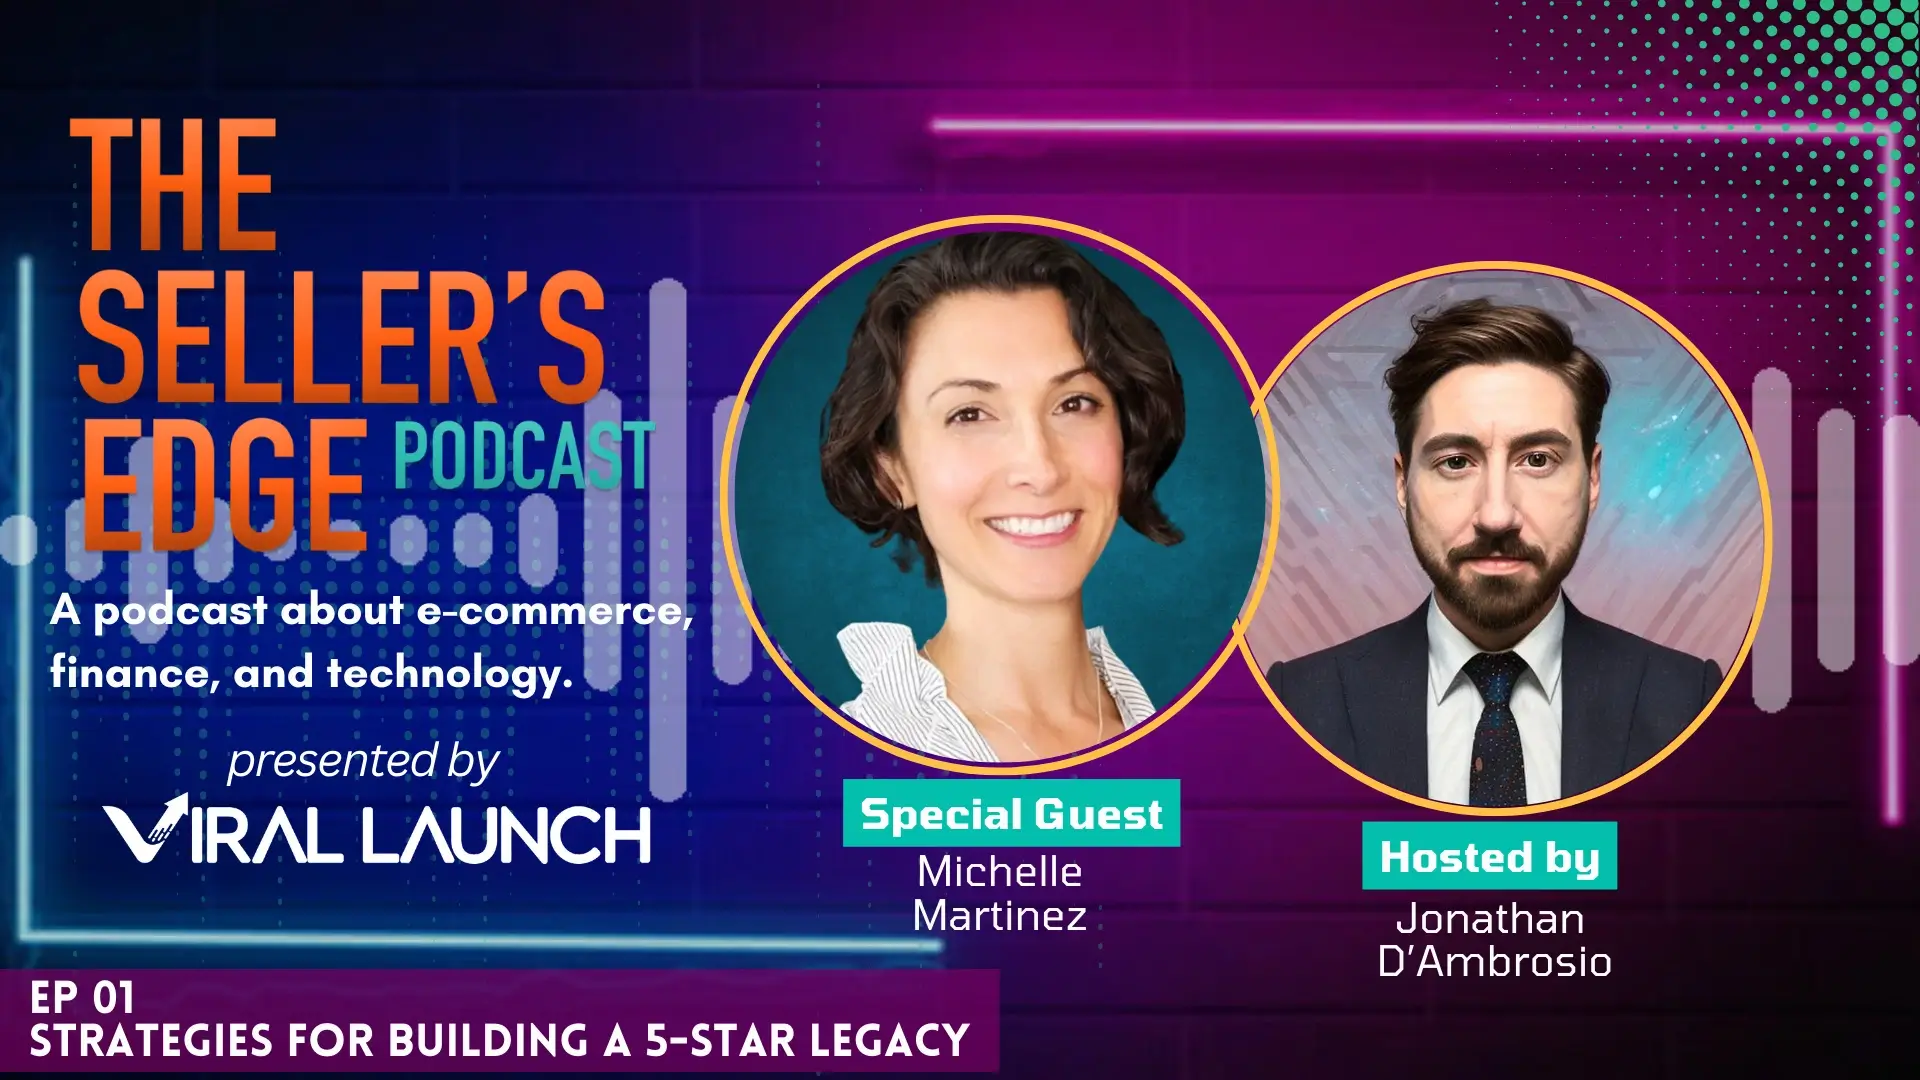 Episode 1 of The Sellers Edge Podcast Where special guest Michelle Martinez and Jonathan D'Ambrosio discuss strategies for building a 5-star legacy.